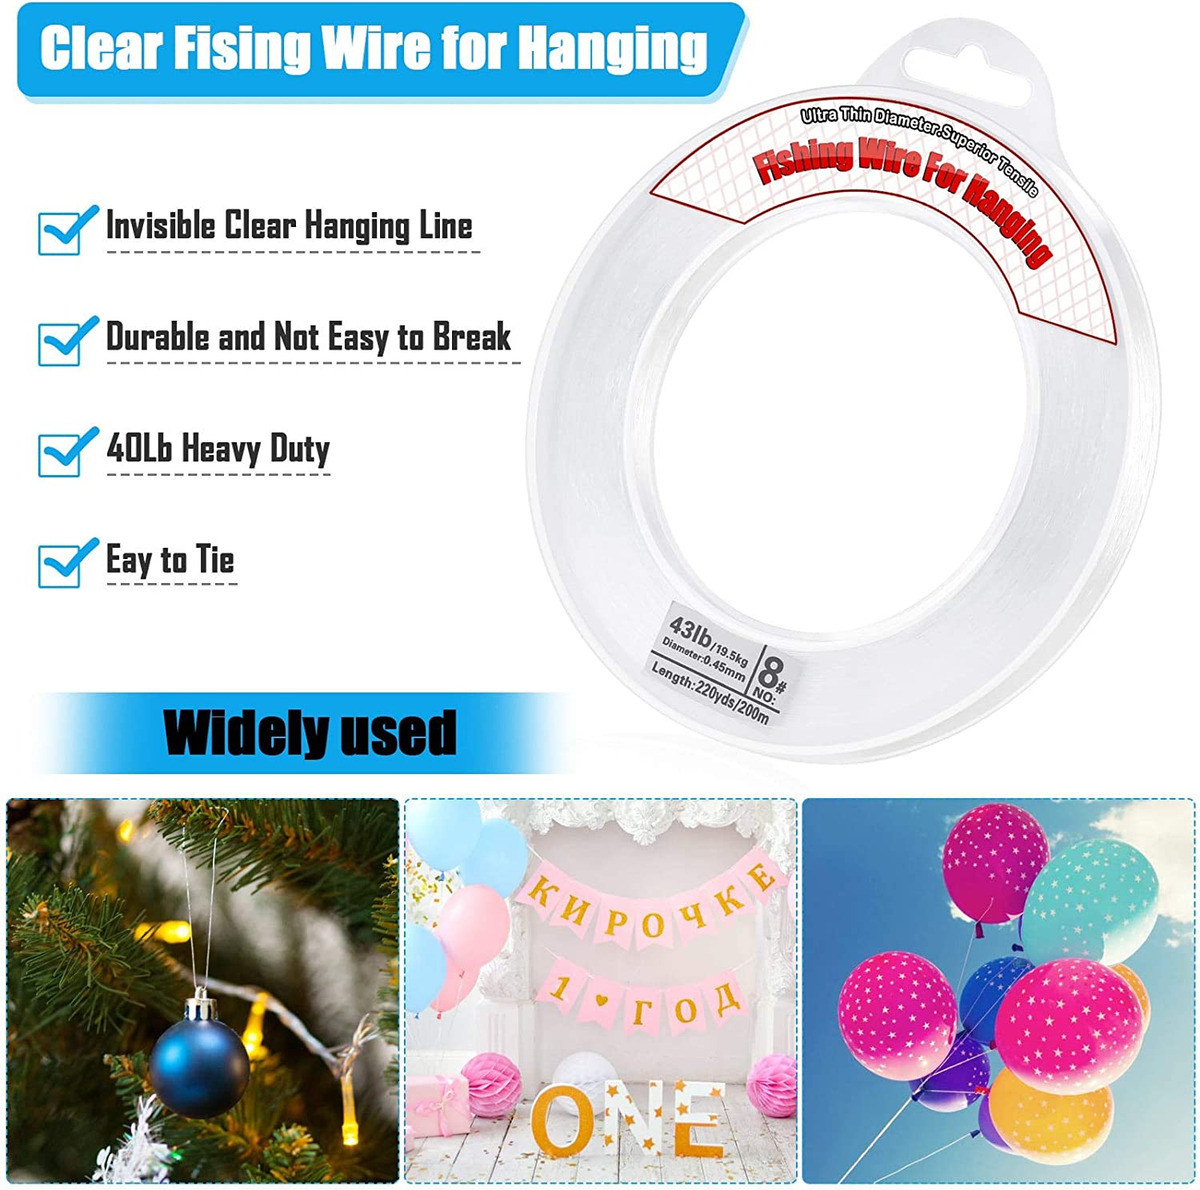 Clear Fishing Wire, 656FT Fishing Line Clear Invisible Hanging